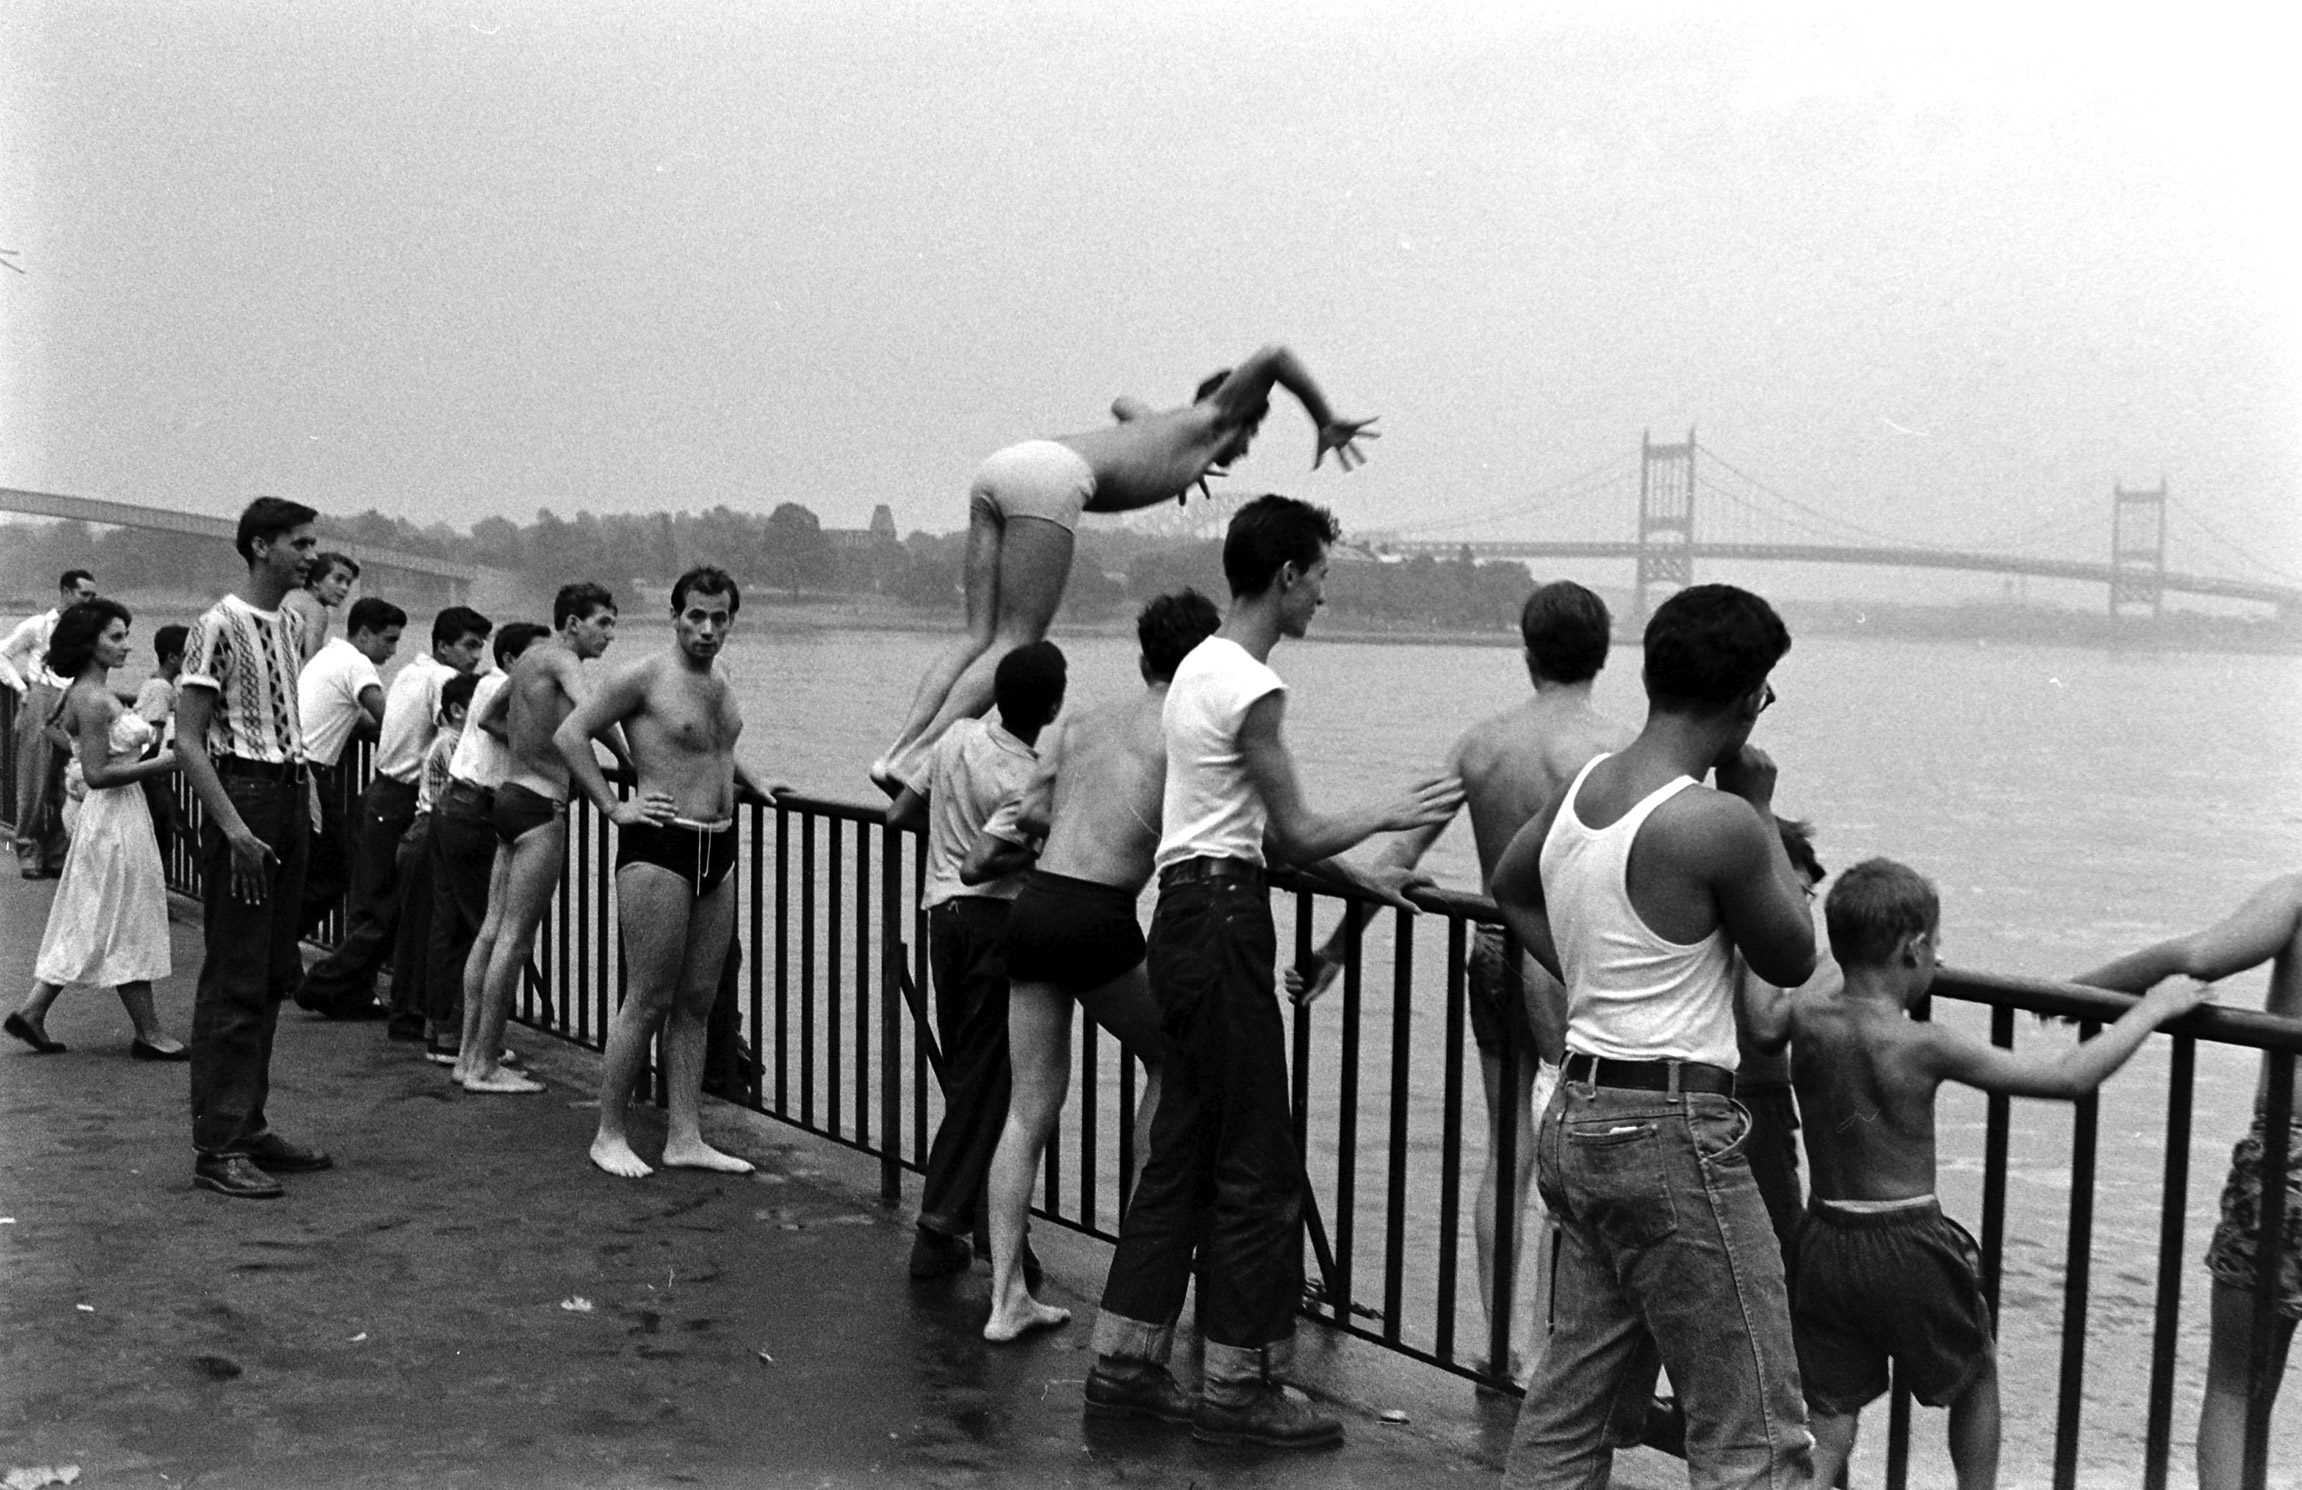 People spending time outdoors during an ongoing heatwave during the summer of 1953 in New York City.